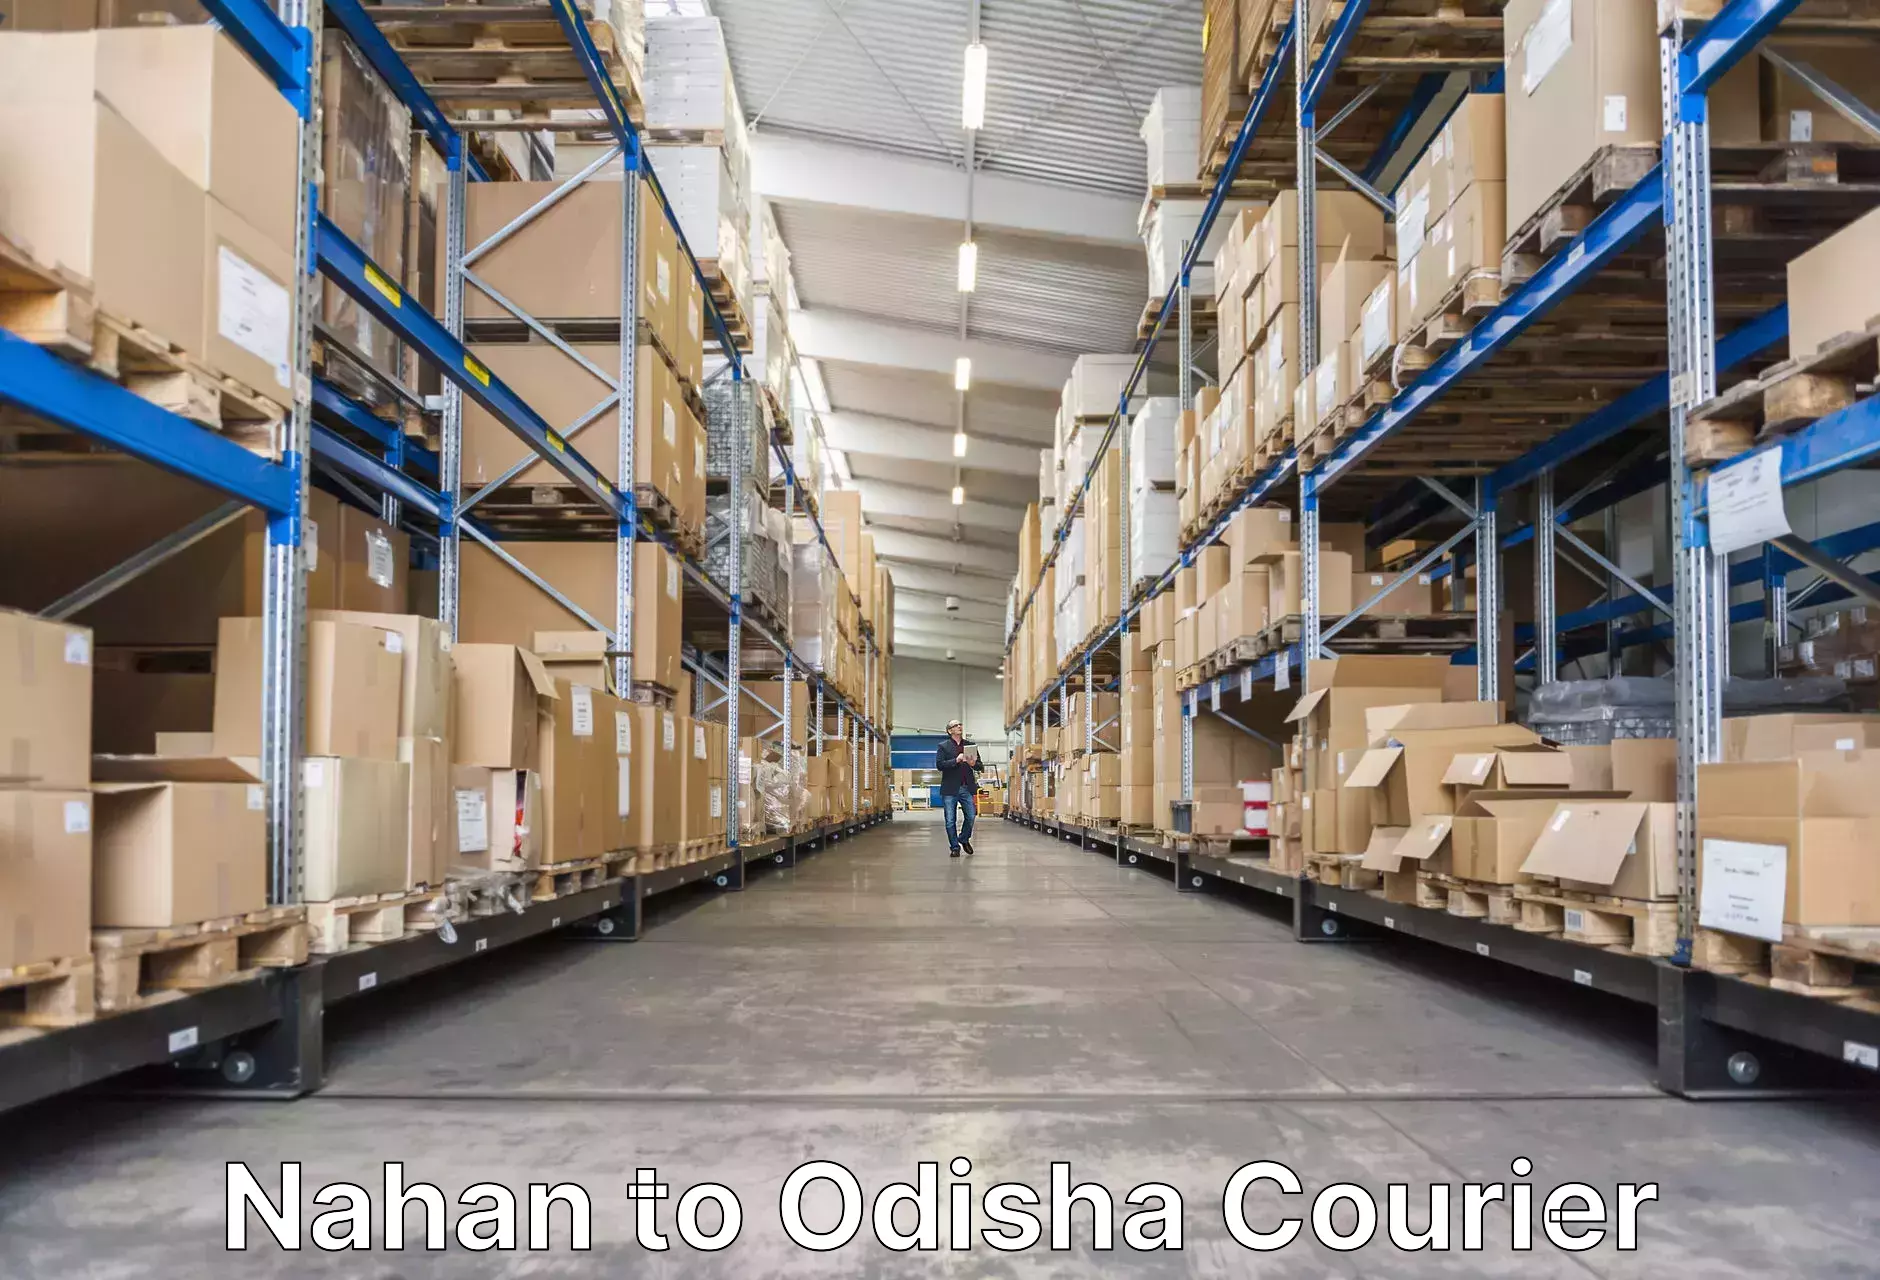 Luggage shipment specialists Nahan to Puri